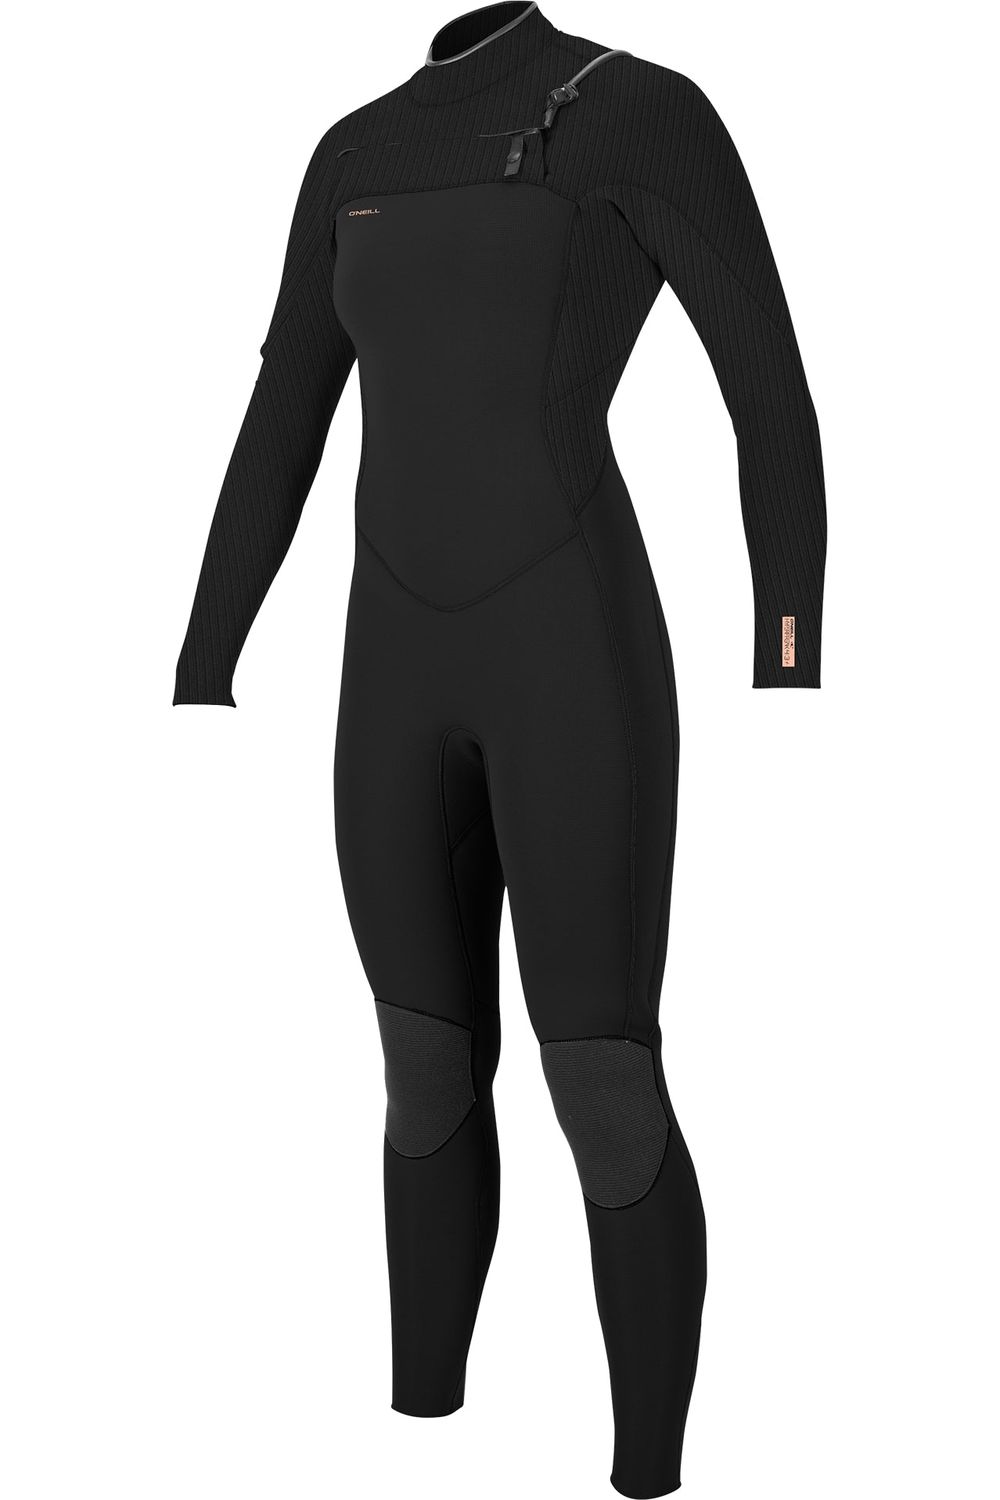 O'neill Hyperfreak Wetsuit Womens 4/3+ from front 